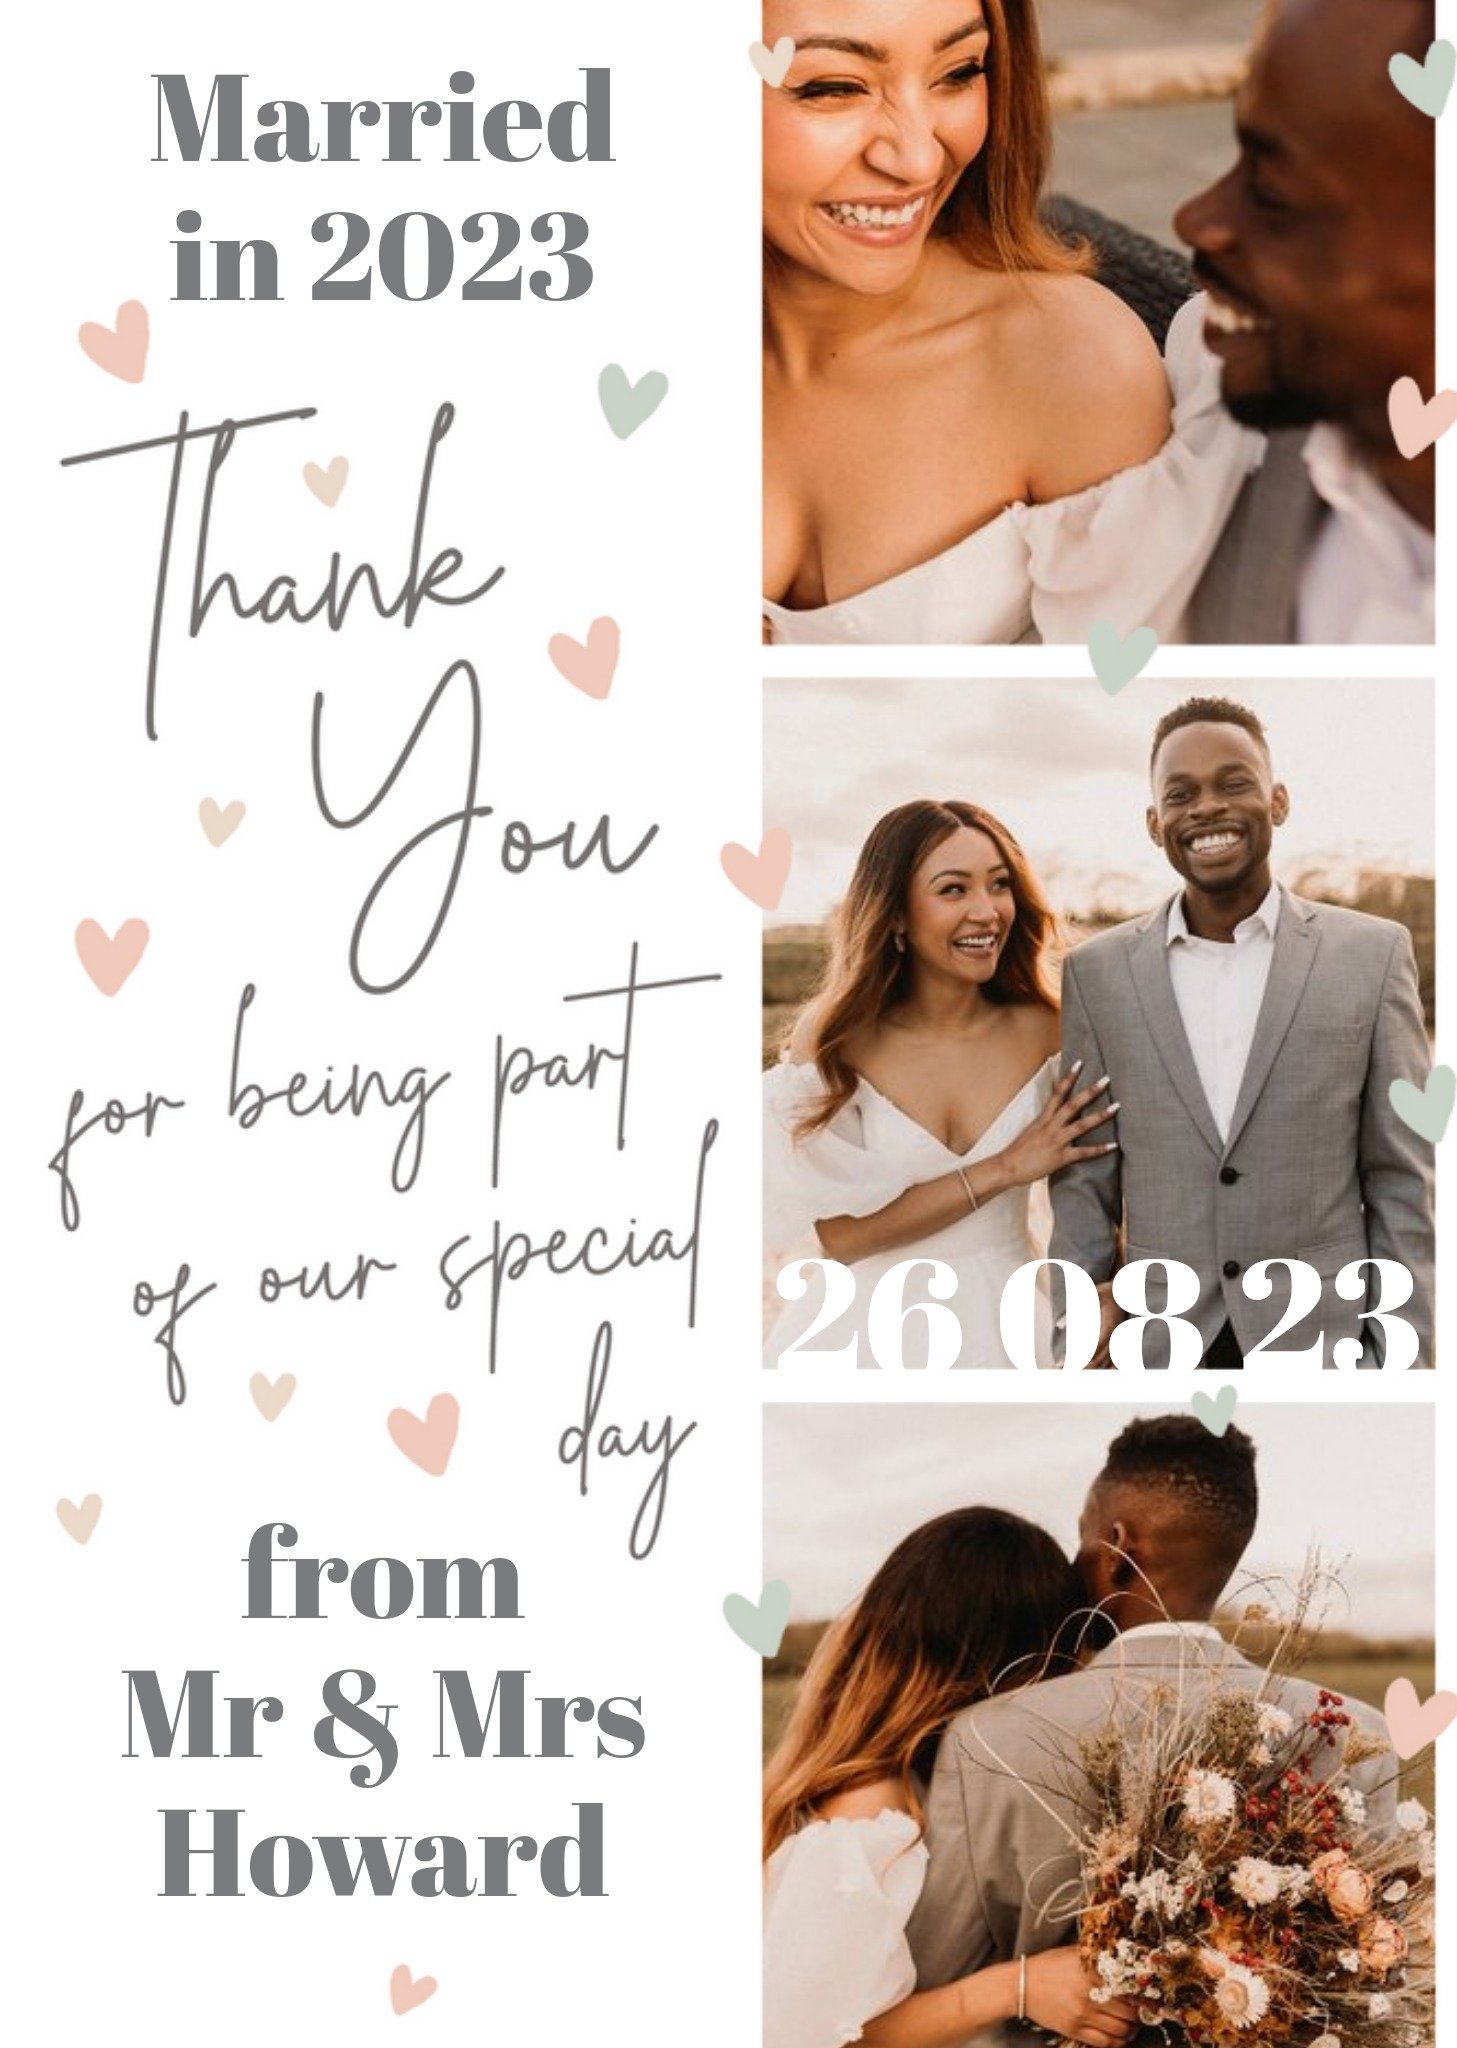 Moonpig Married In 2023 Wedding Thank You Photo Upload Card, Large